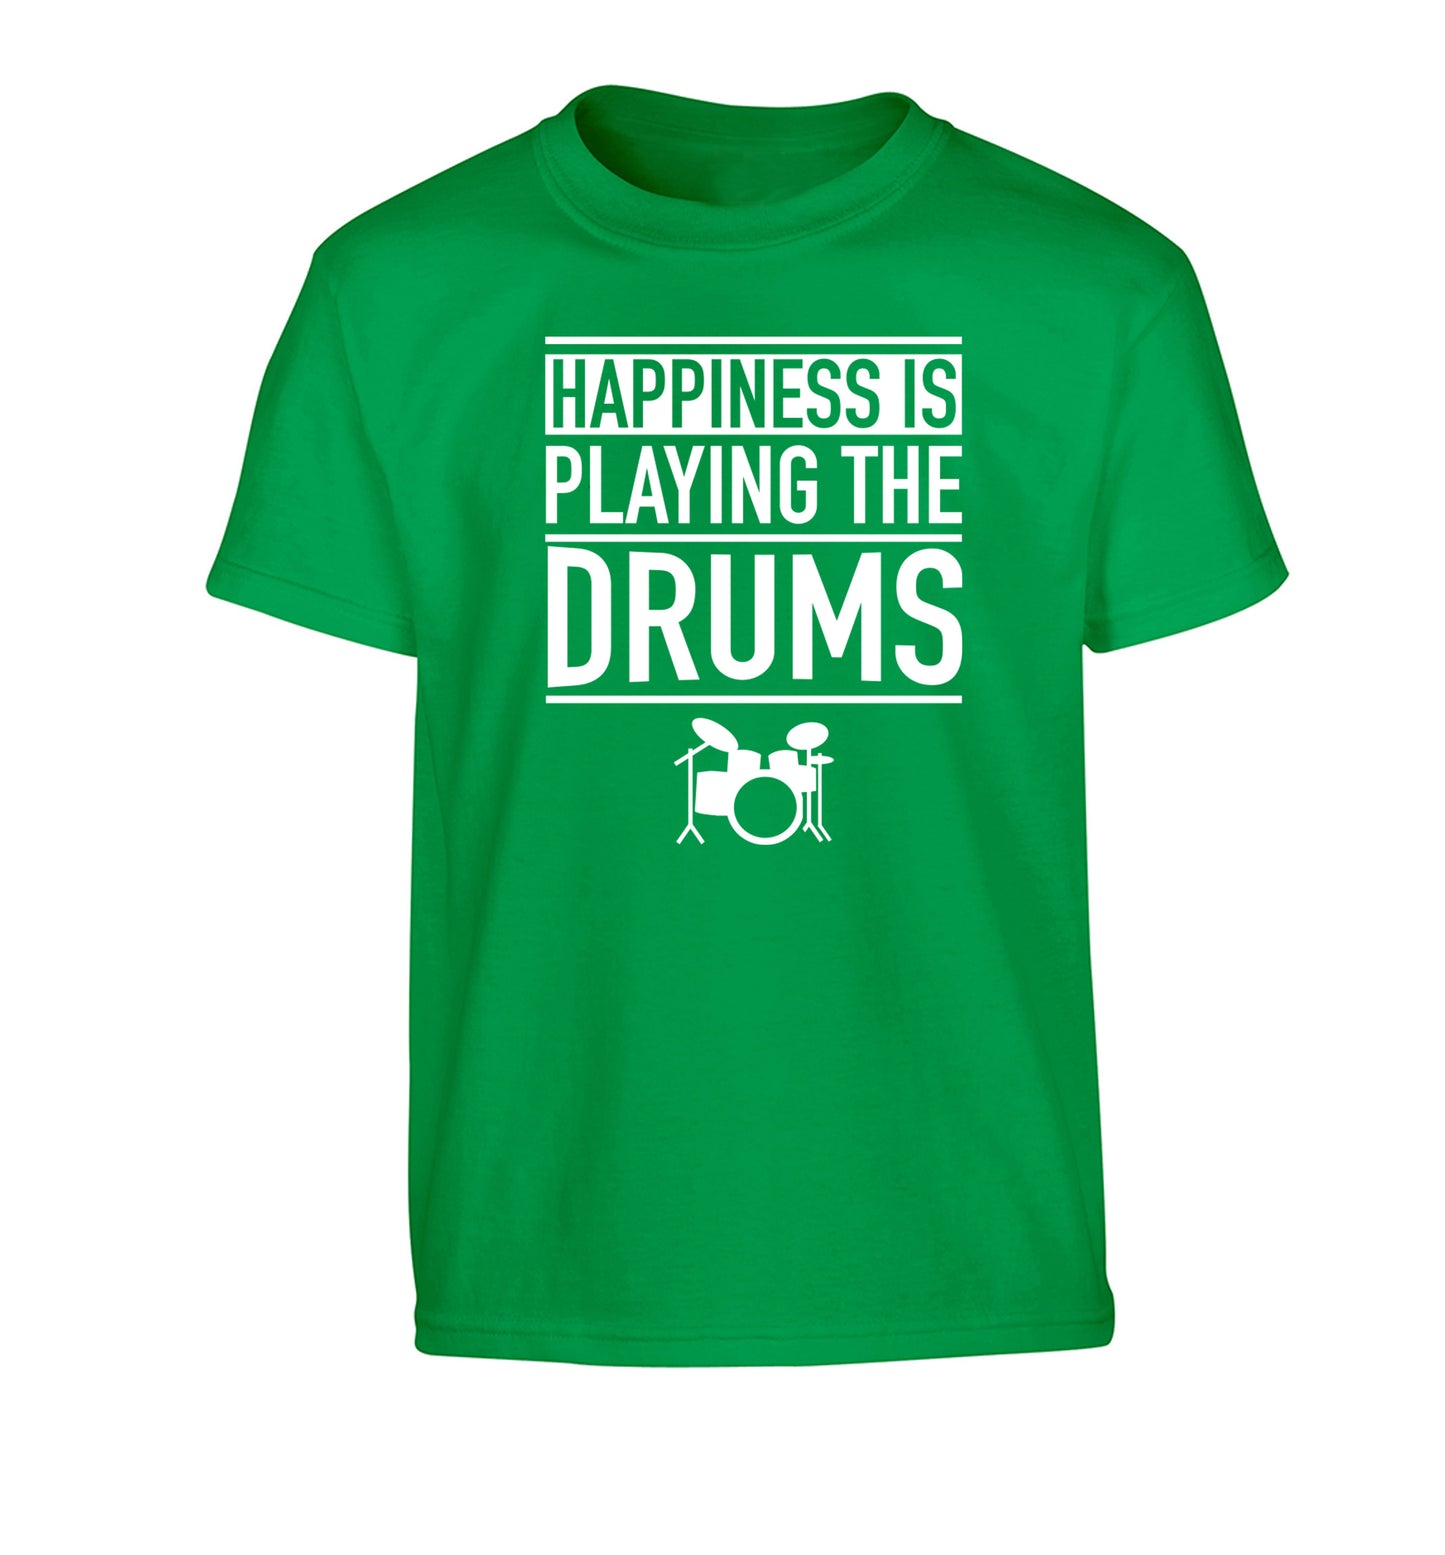 Happiness is playing the drums Children's green Tshirt 12-14 Years